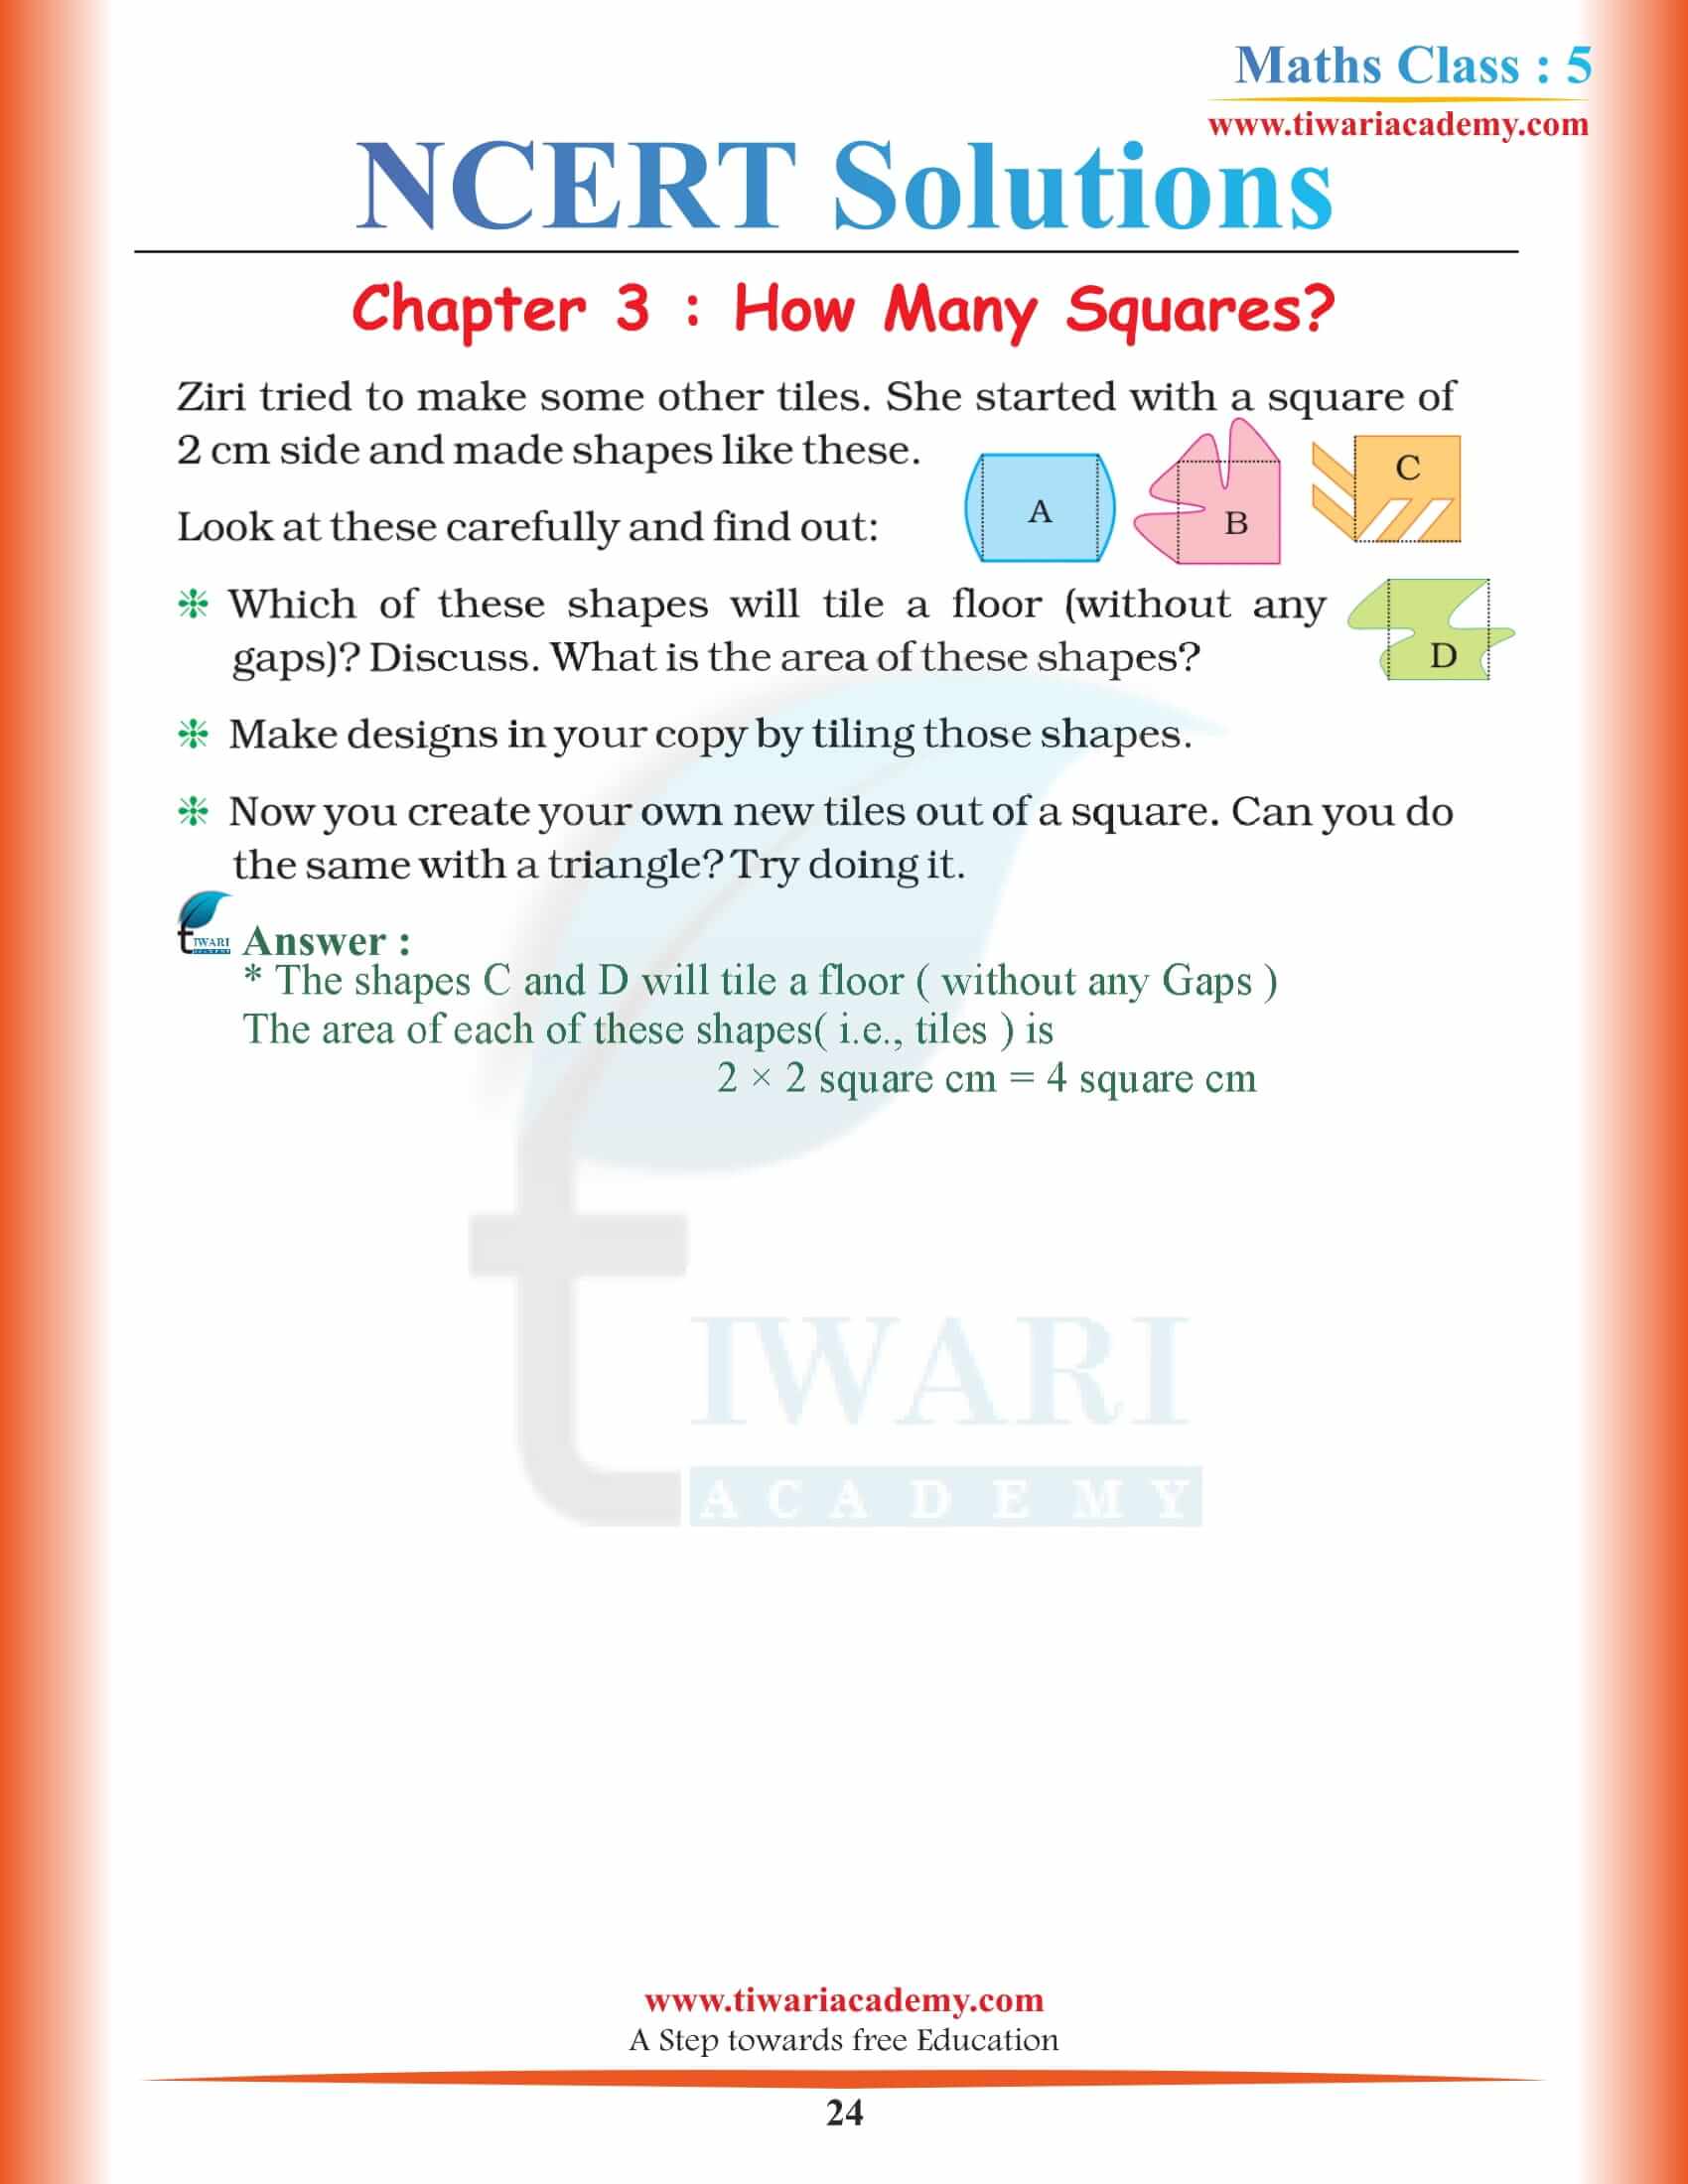 5th Maths Chapter 3 Solutions pdf